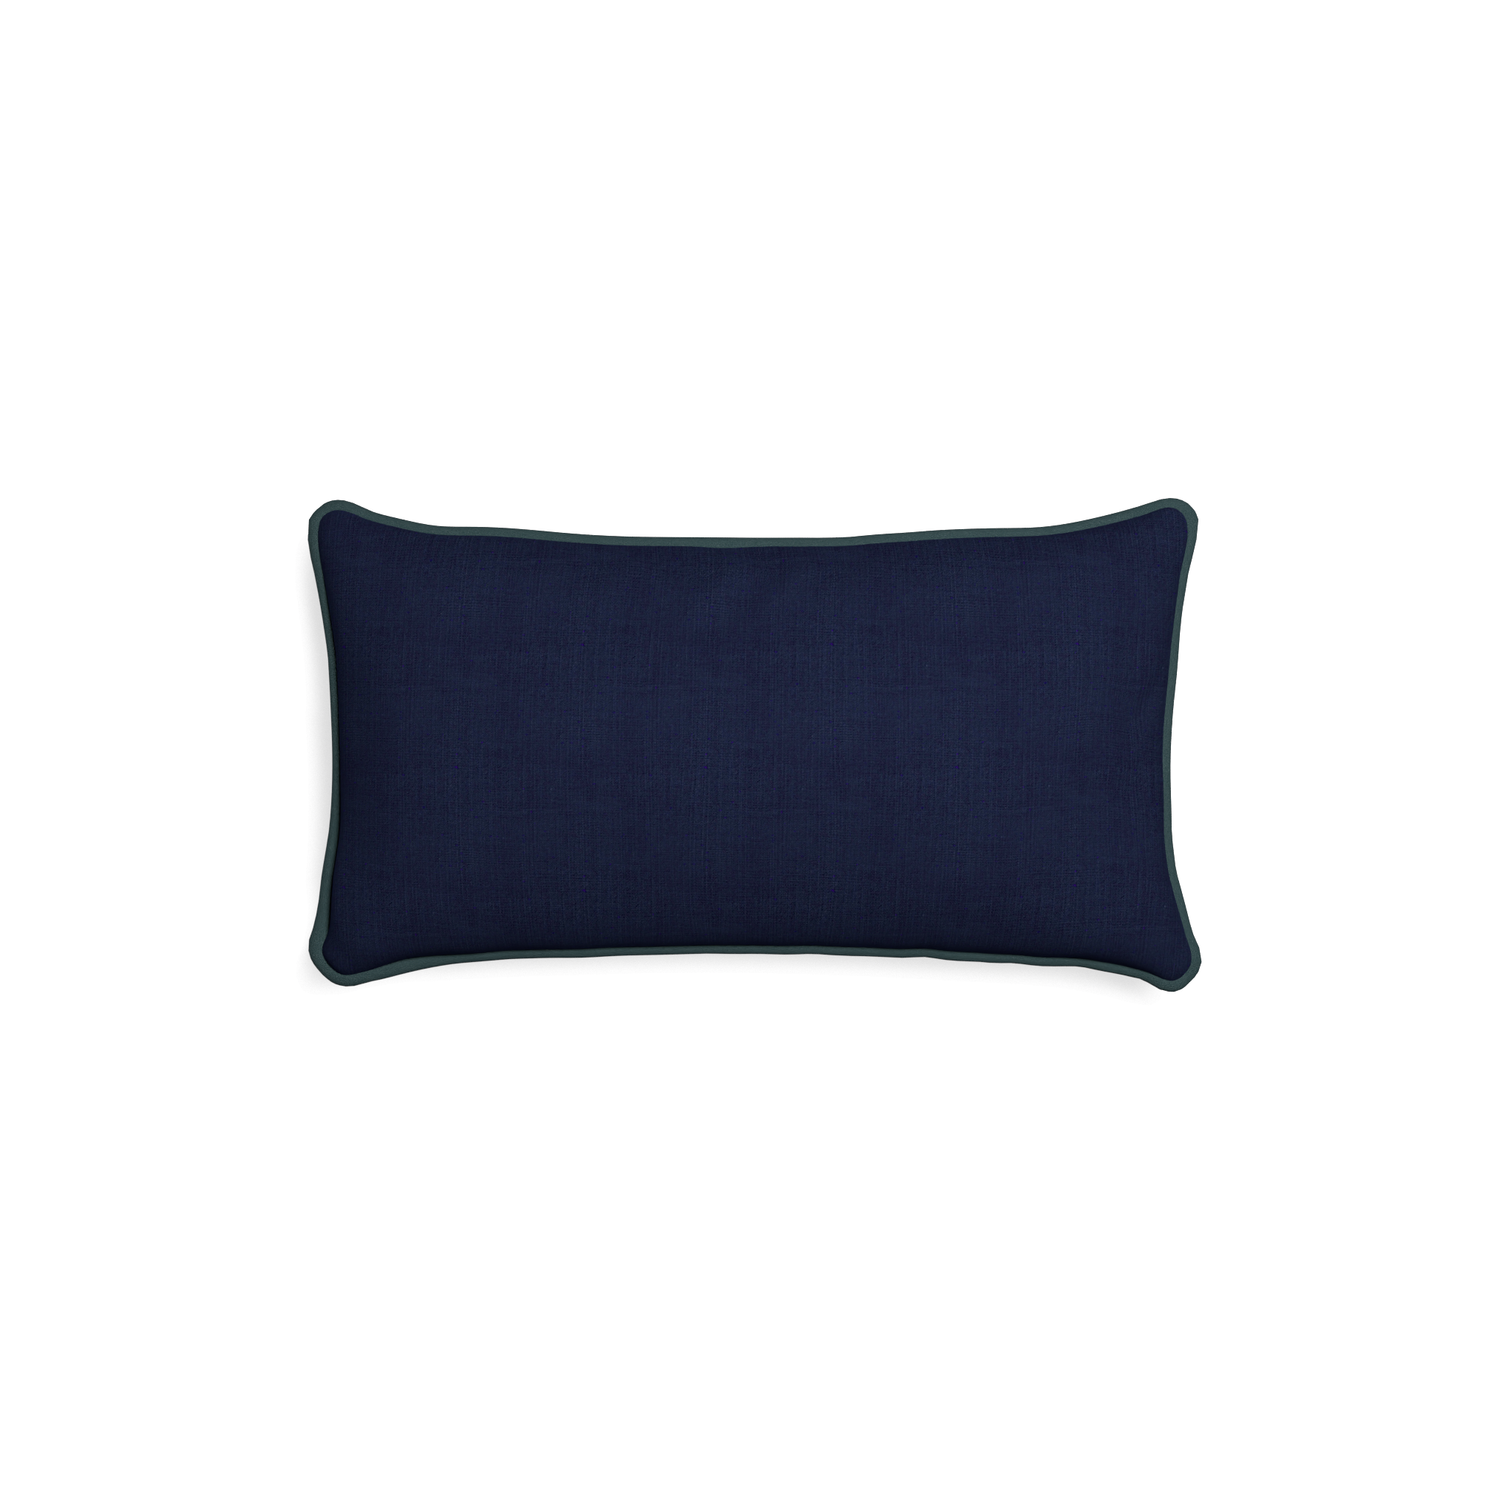 Petite-lumbar midnight custom navy bluepillow with p piping on white background